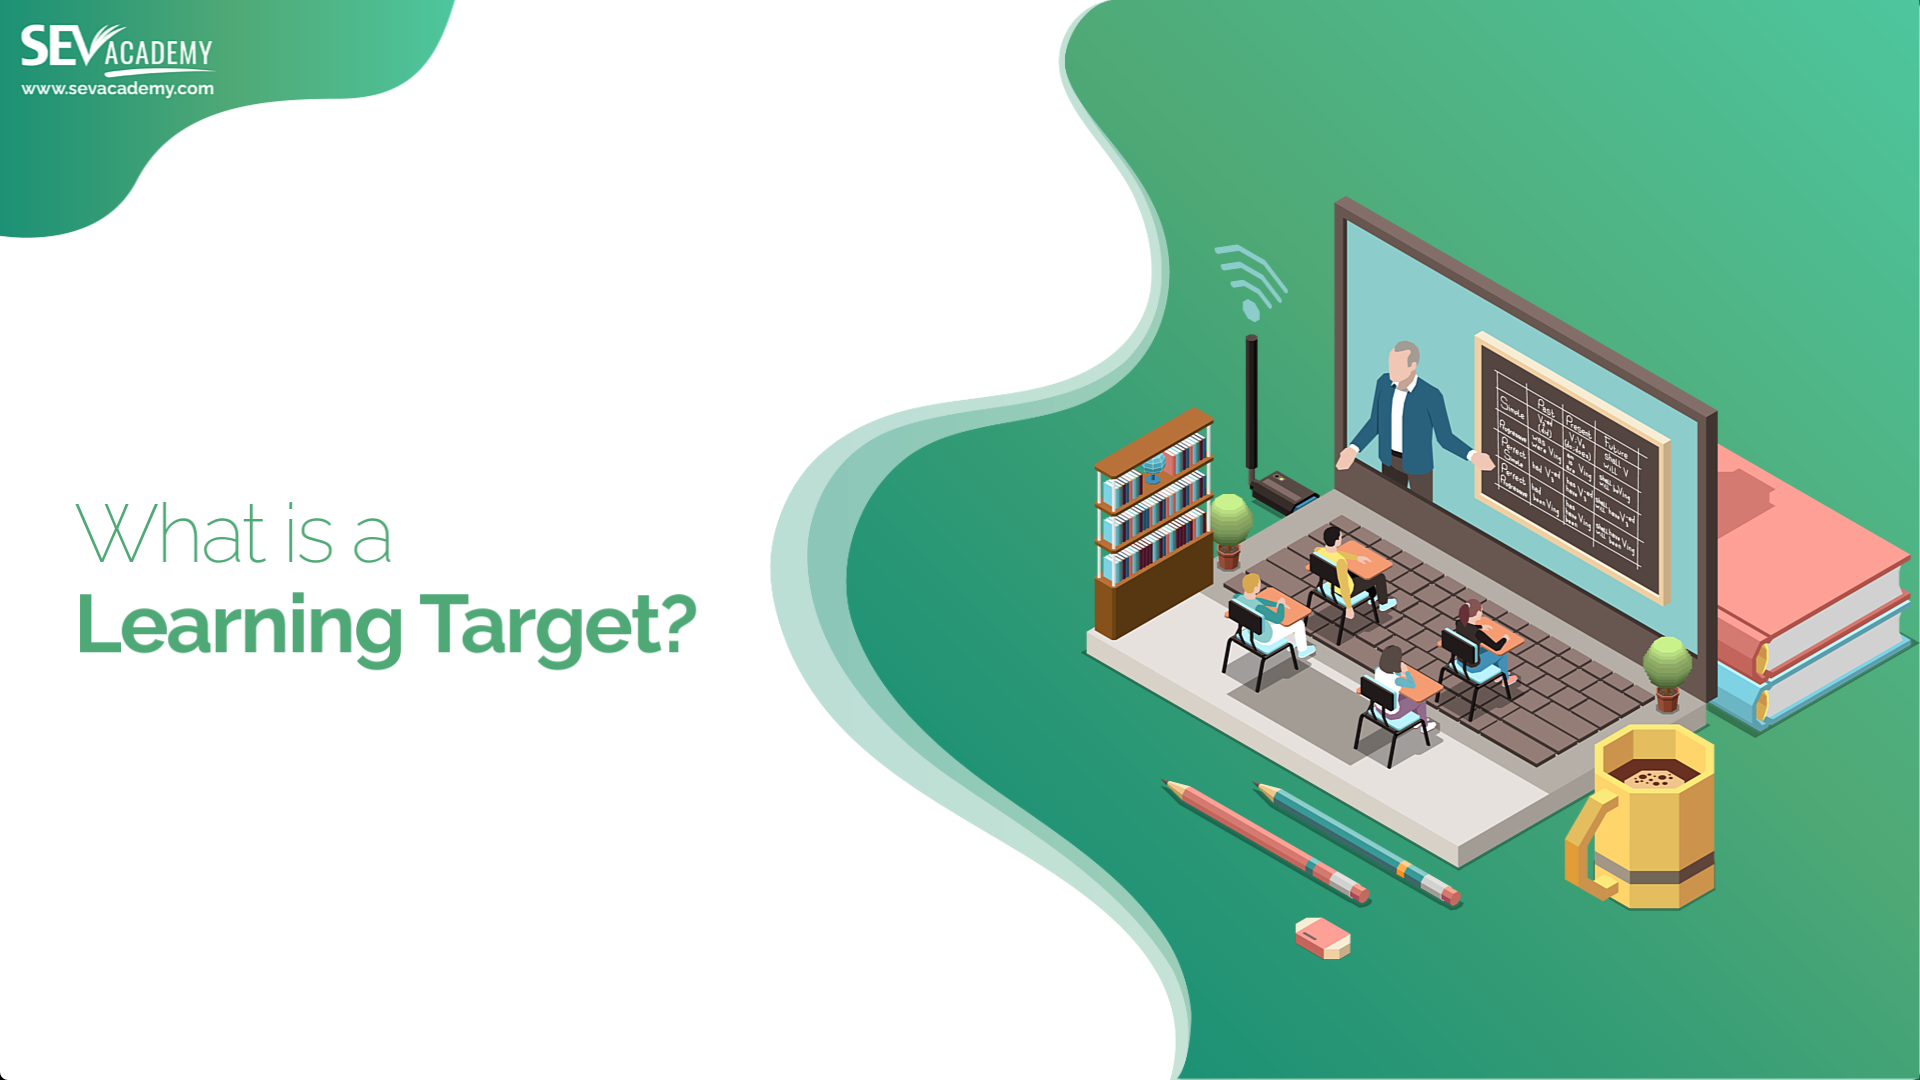 What is a Learning Target?